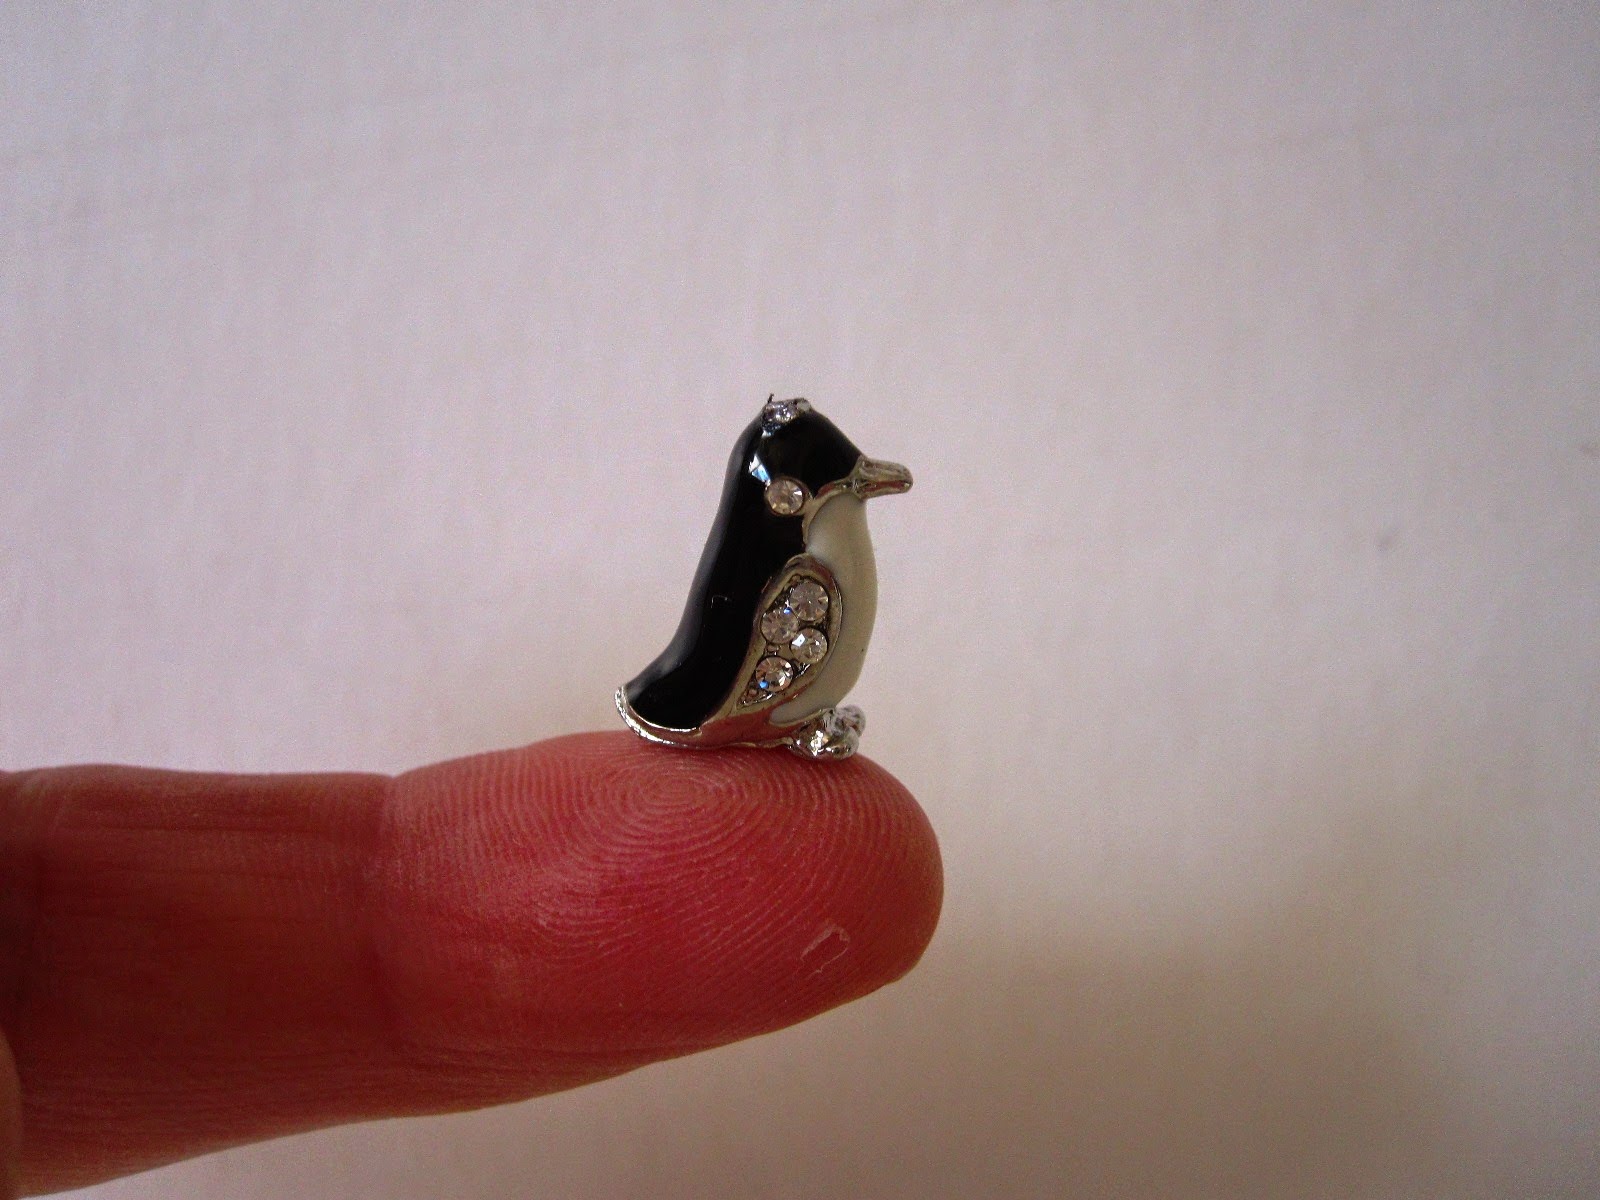 Small jewelled penguin charm, balanced on the end of a finger.